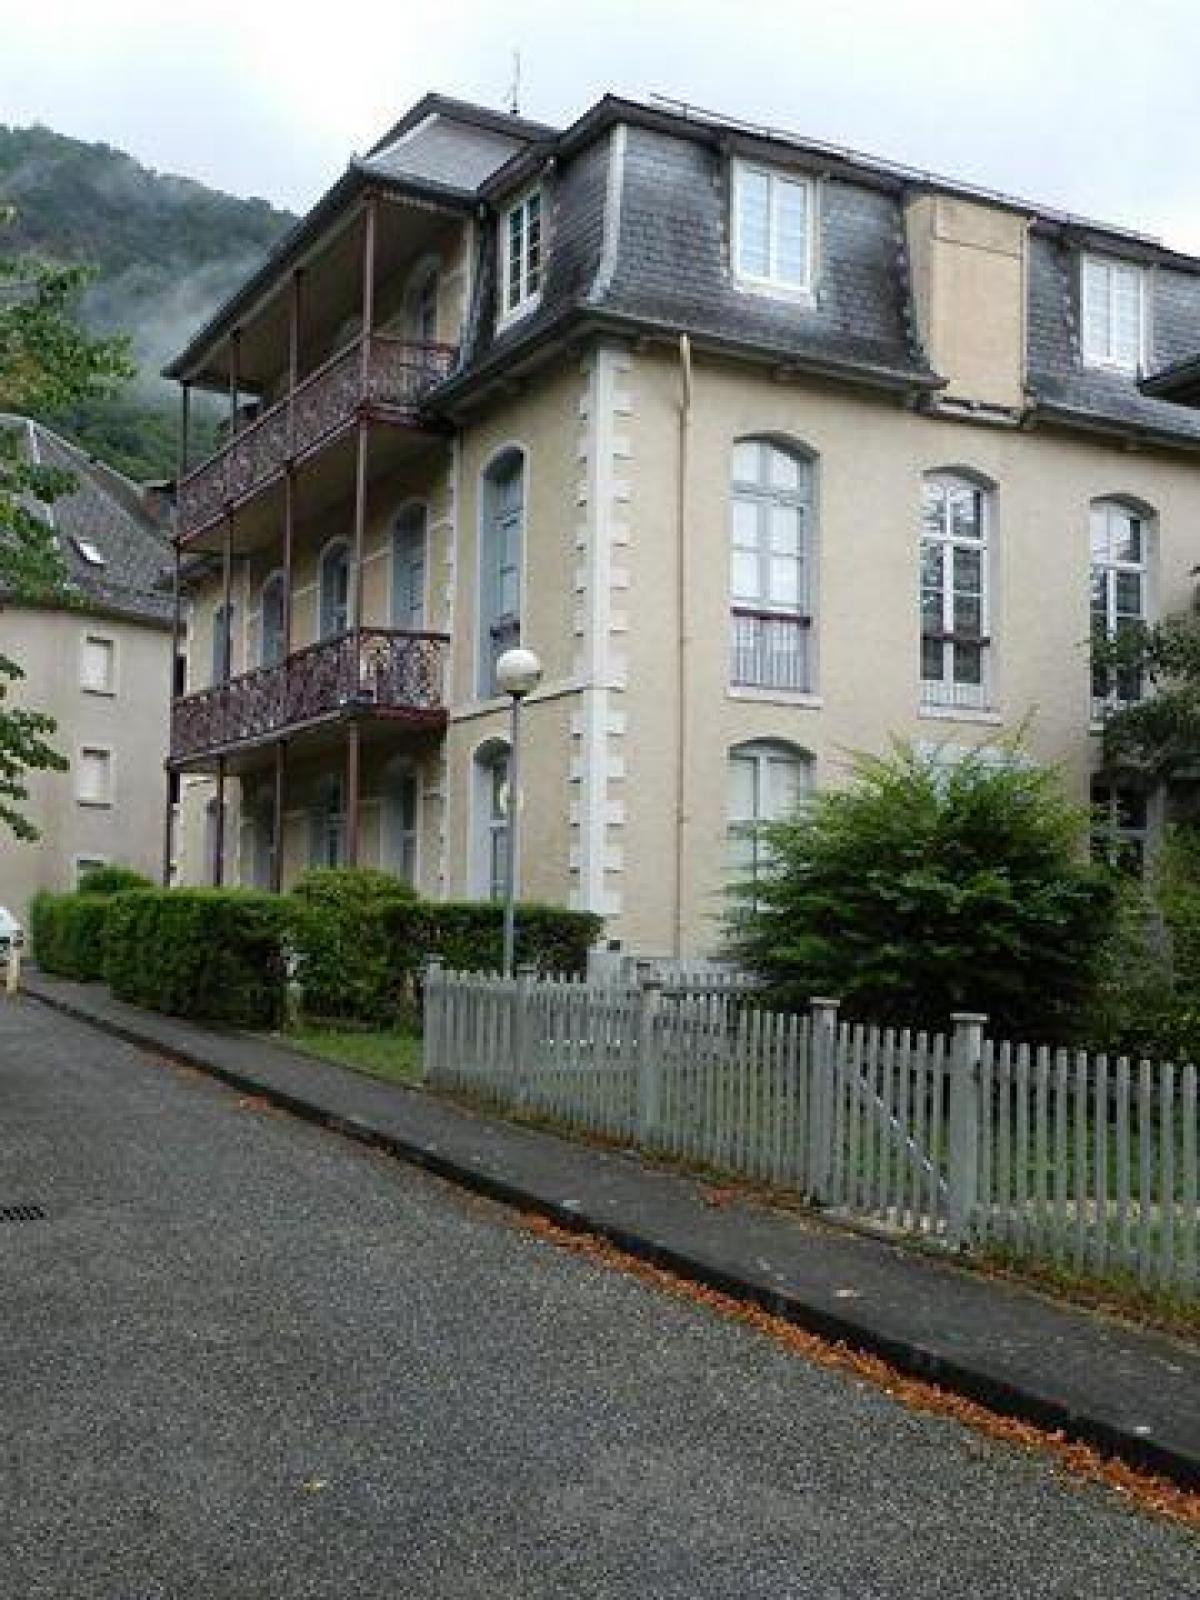 Picture of Condo For Sale in Bagneres De Luchon, Midi Pyrenees, France